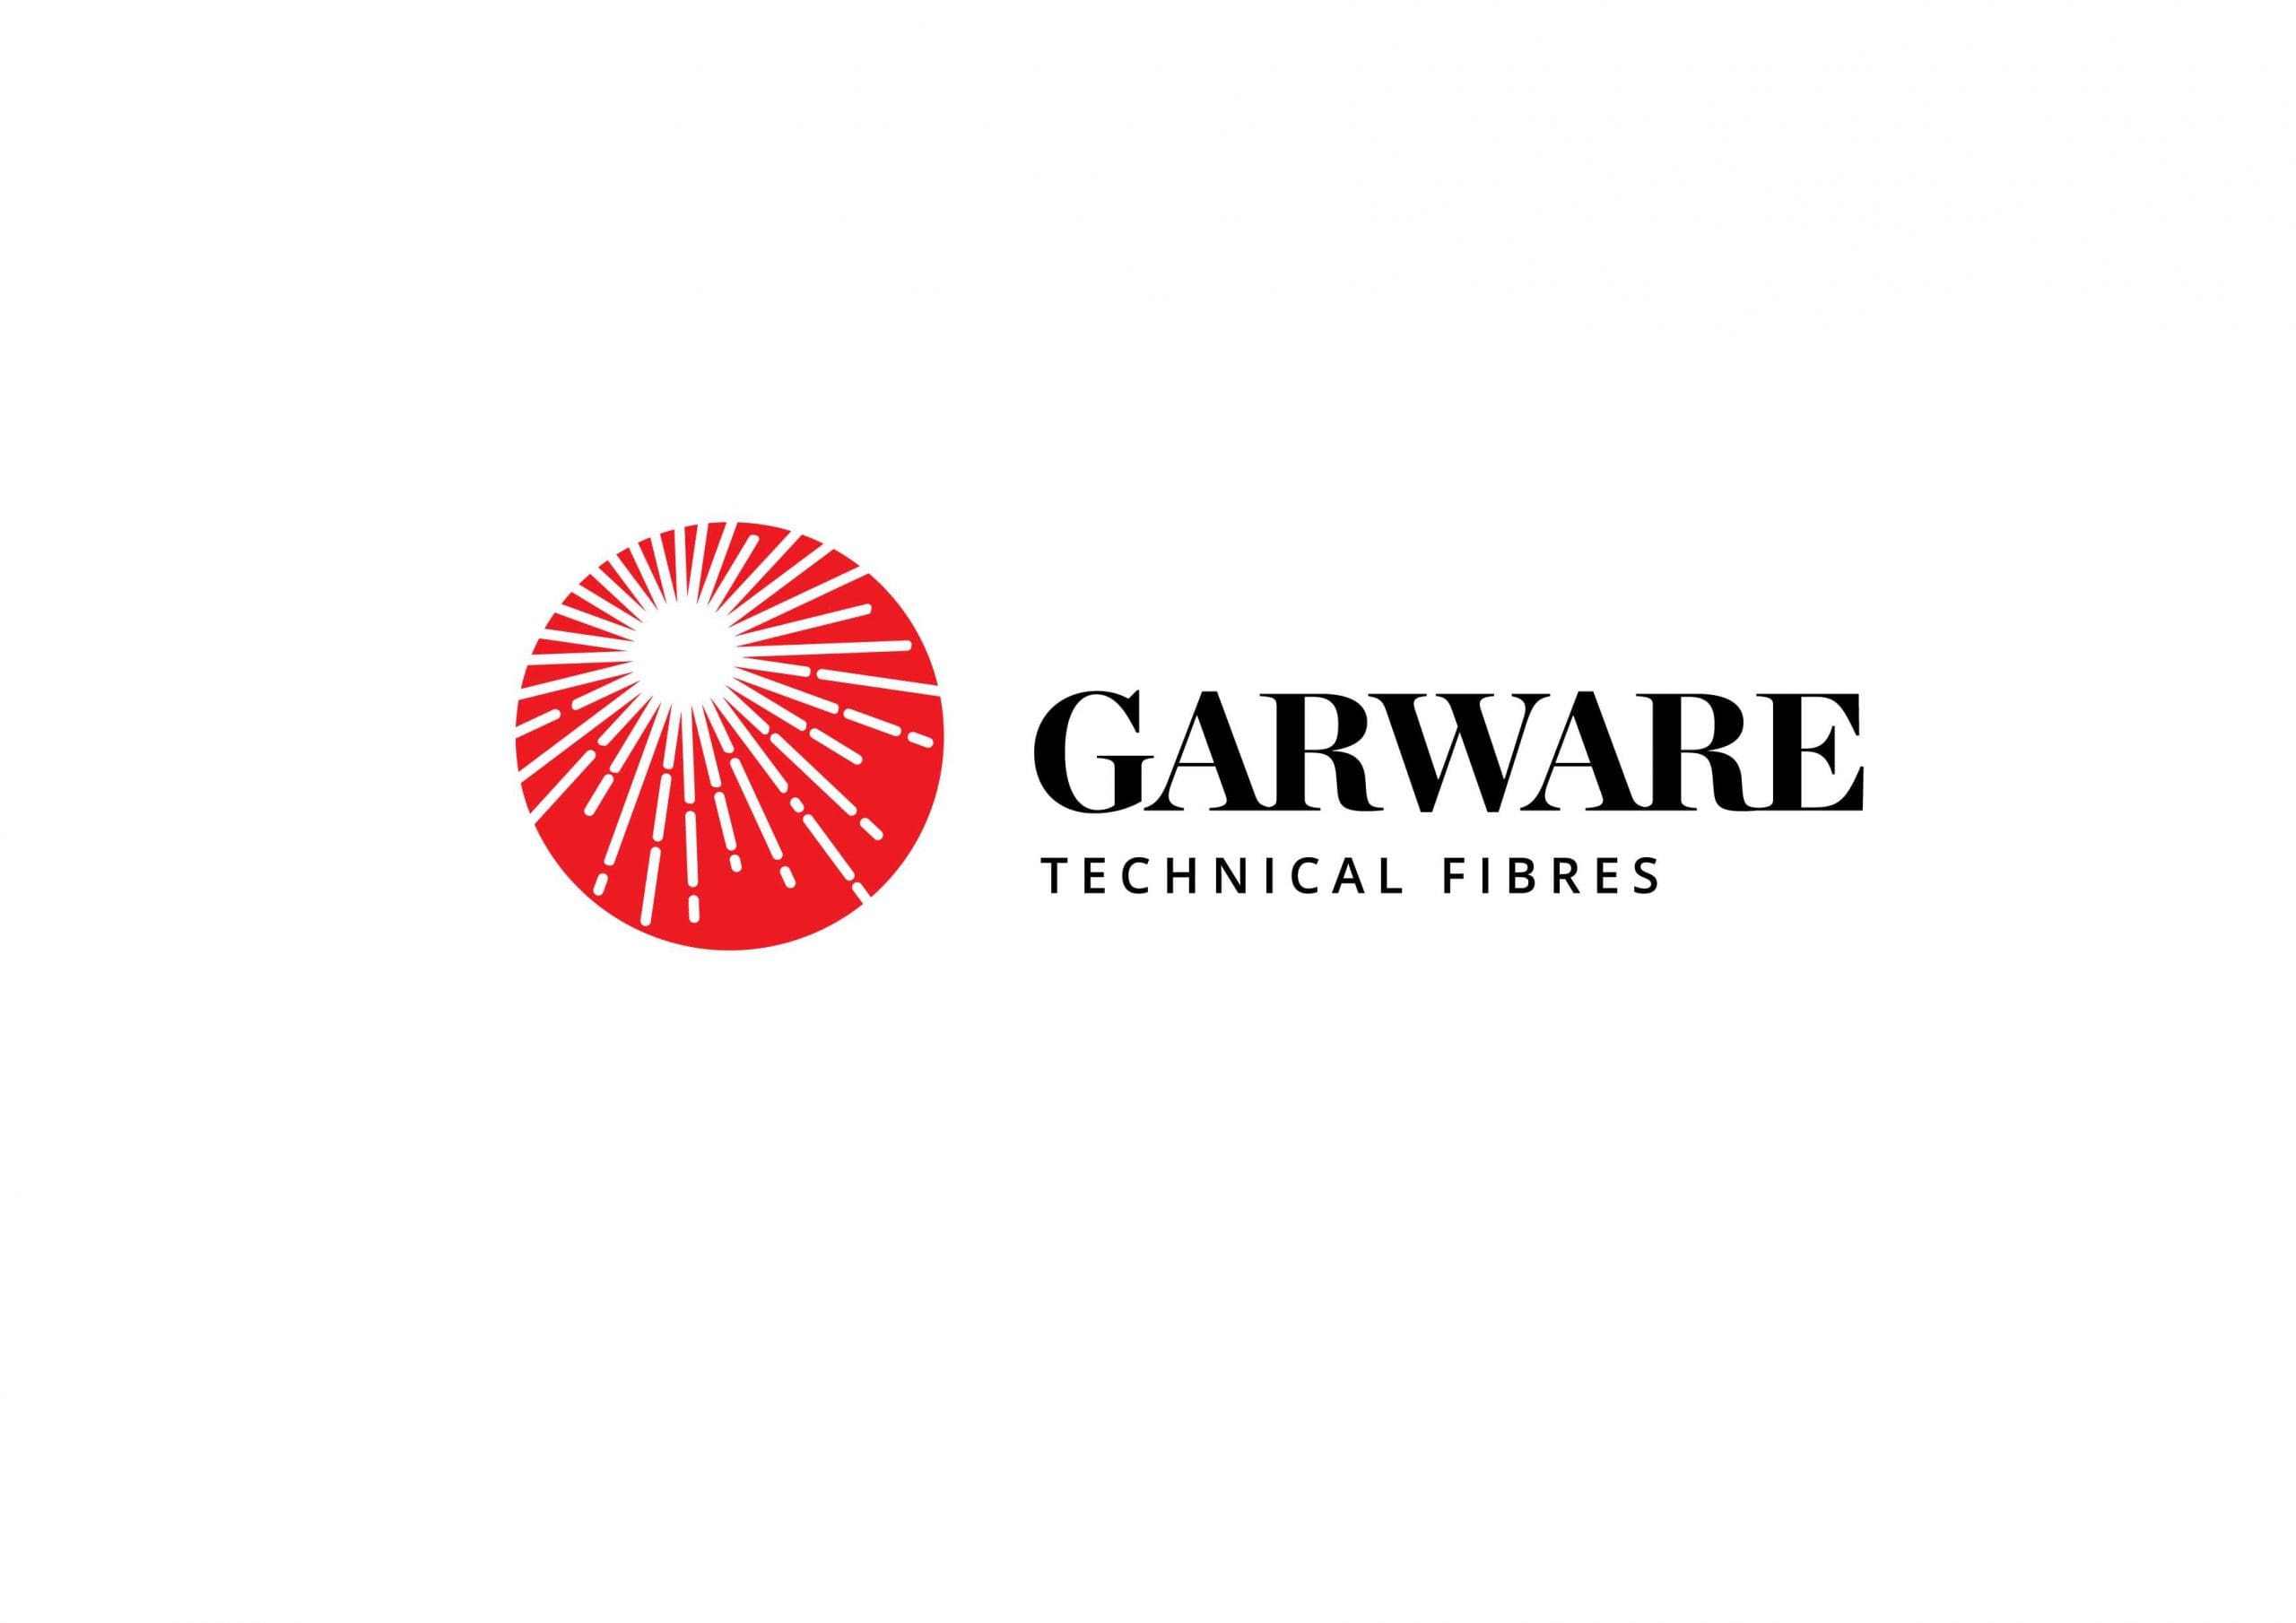 Global salmon demand in upswing: Globally one-in-three salmon are protected by Garware Technical Fibers Ltd nets